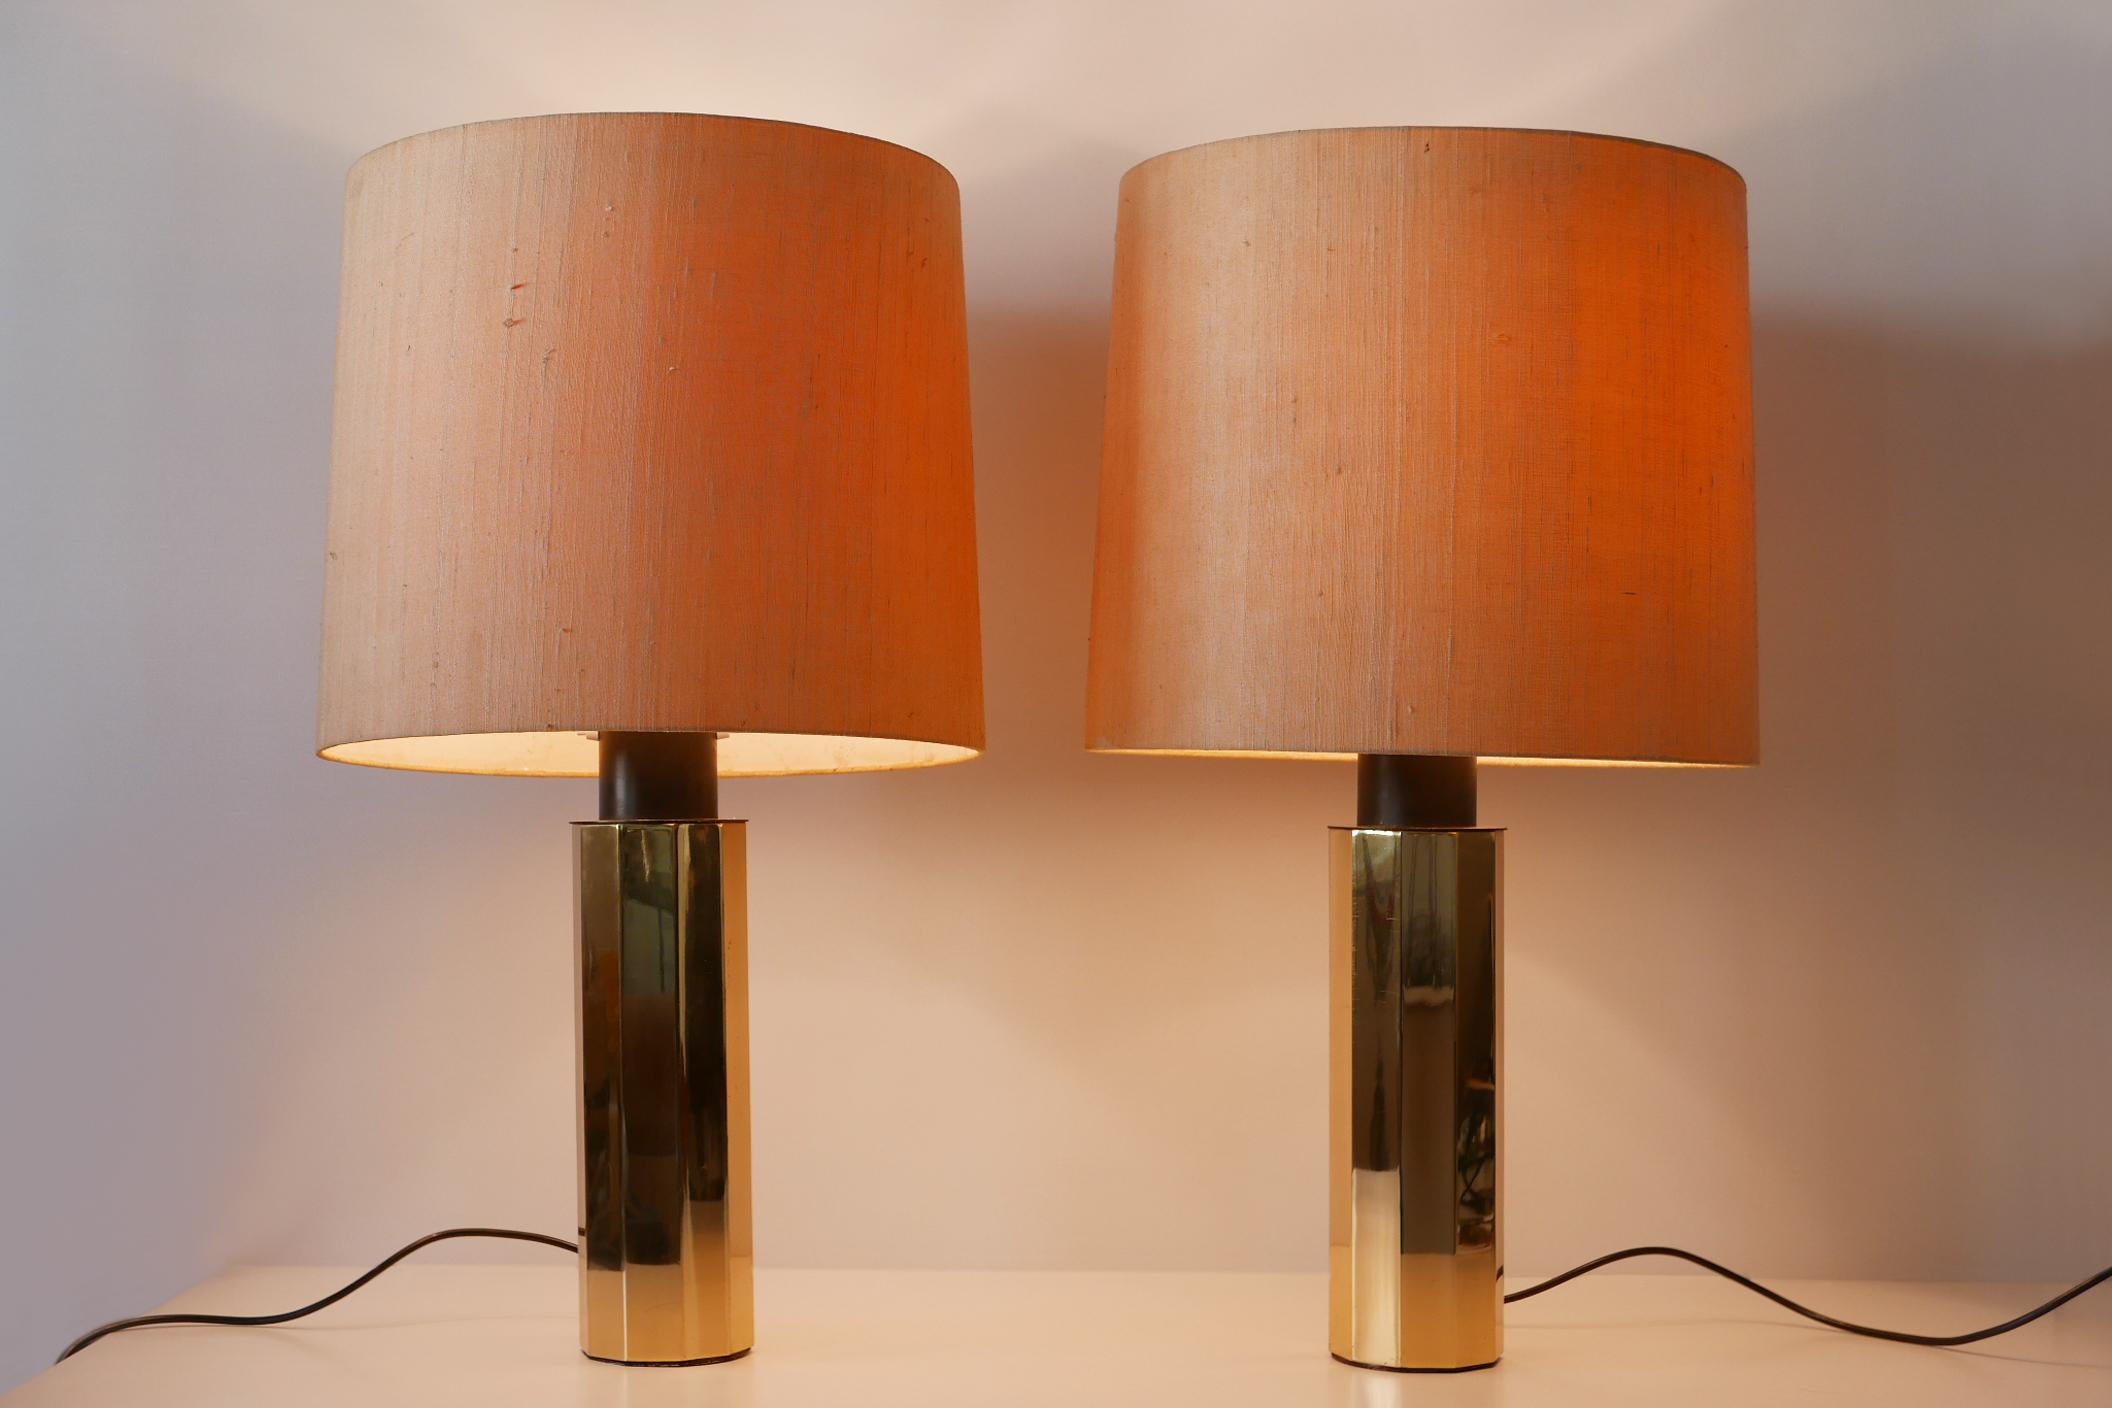 Set of two huge, exceptional and elegant Mid-Century Modern decagonal brass table lamps. Designed and manufactured probably 1960s in Germany.

Executed in polished brass, aluminium, each lamp comes with 5 x E27/26 Edison screw fit bulb holders,